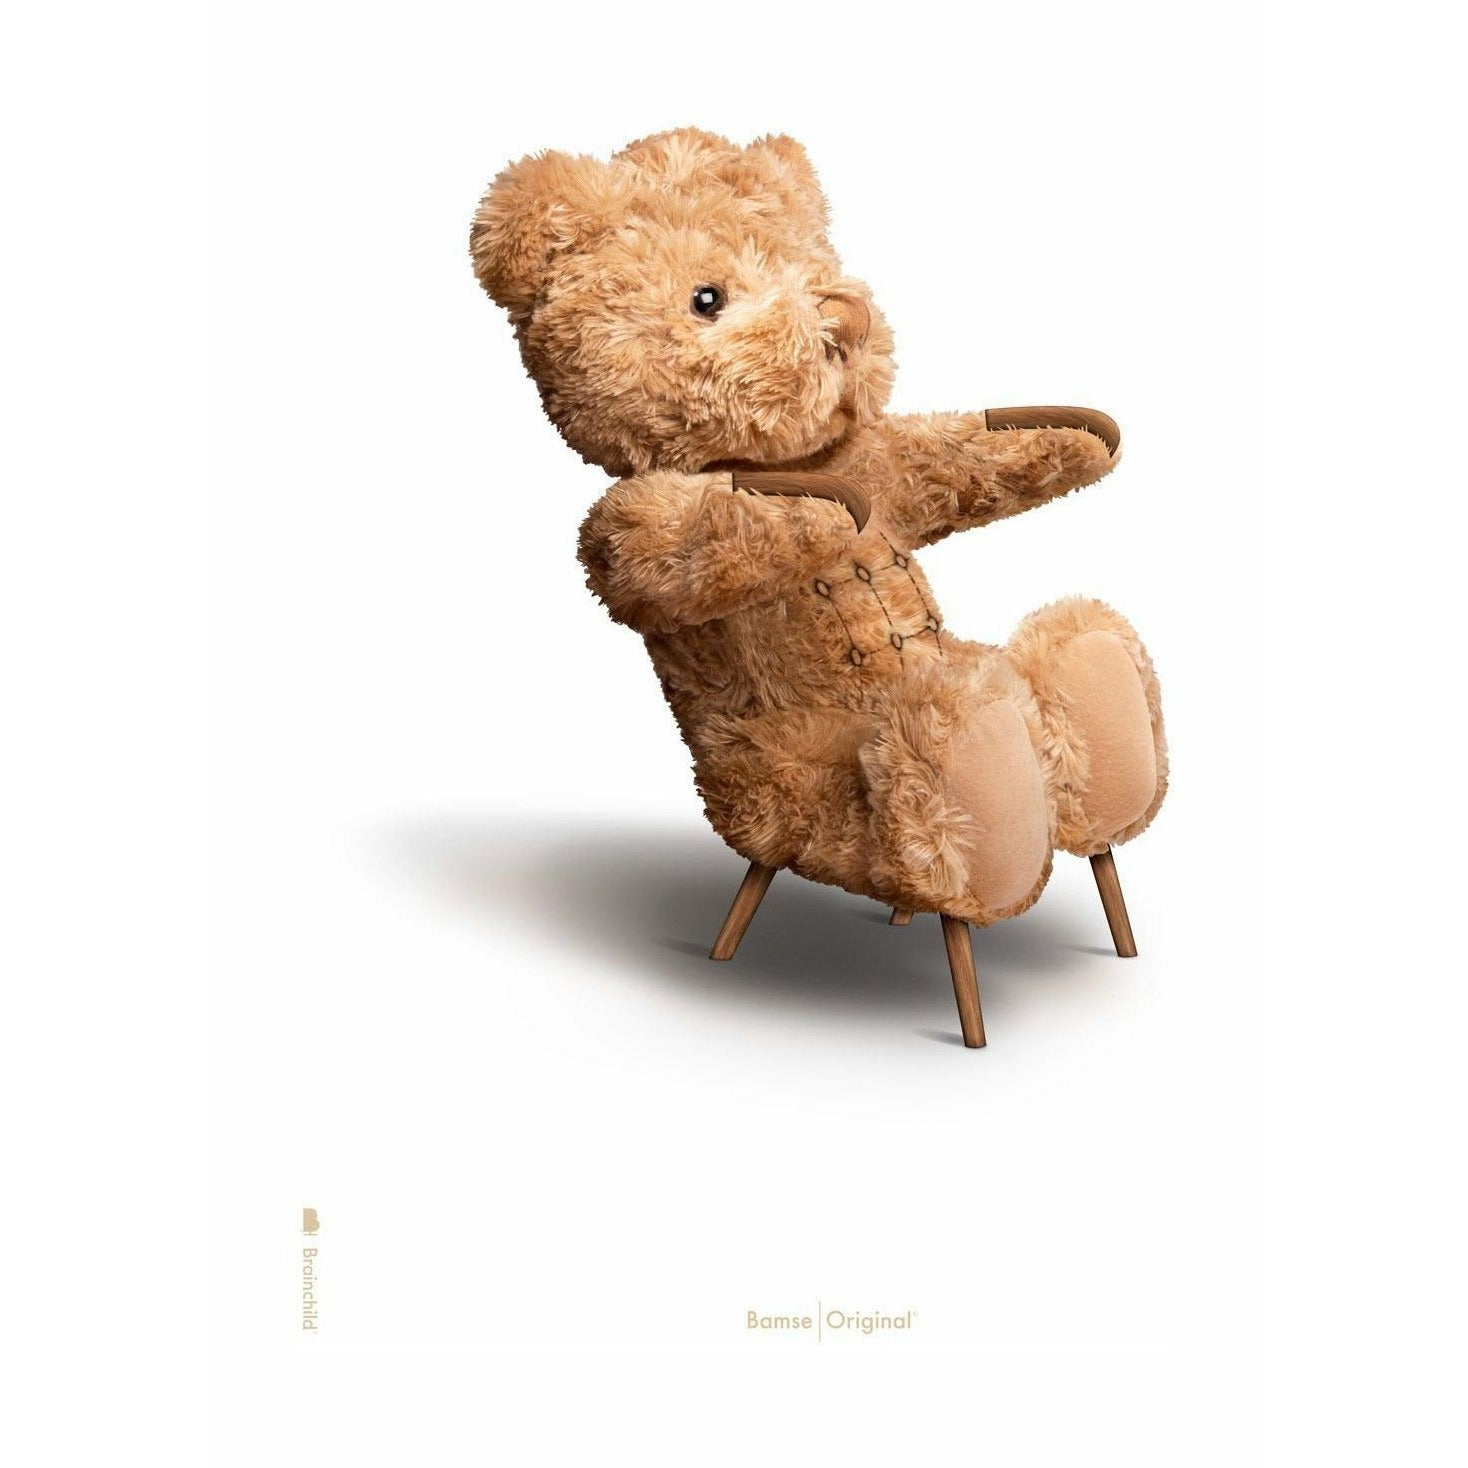 Brainchild Teddy Bear Classic Poster Without Frame 50x70 Cm, White Background